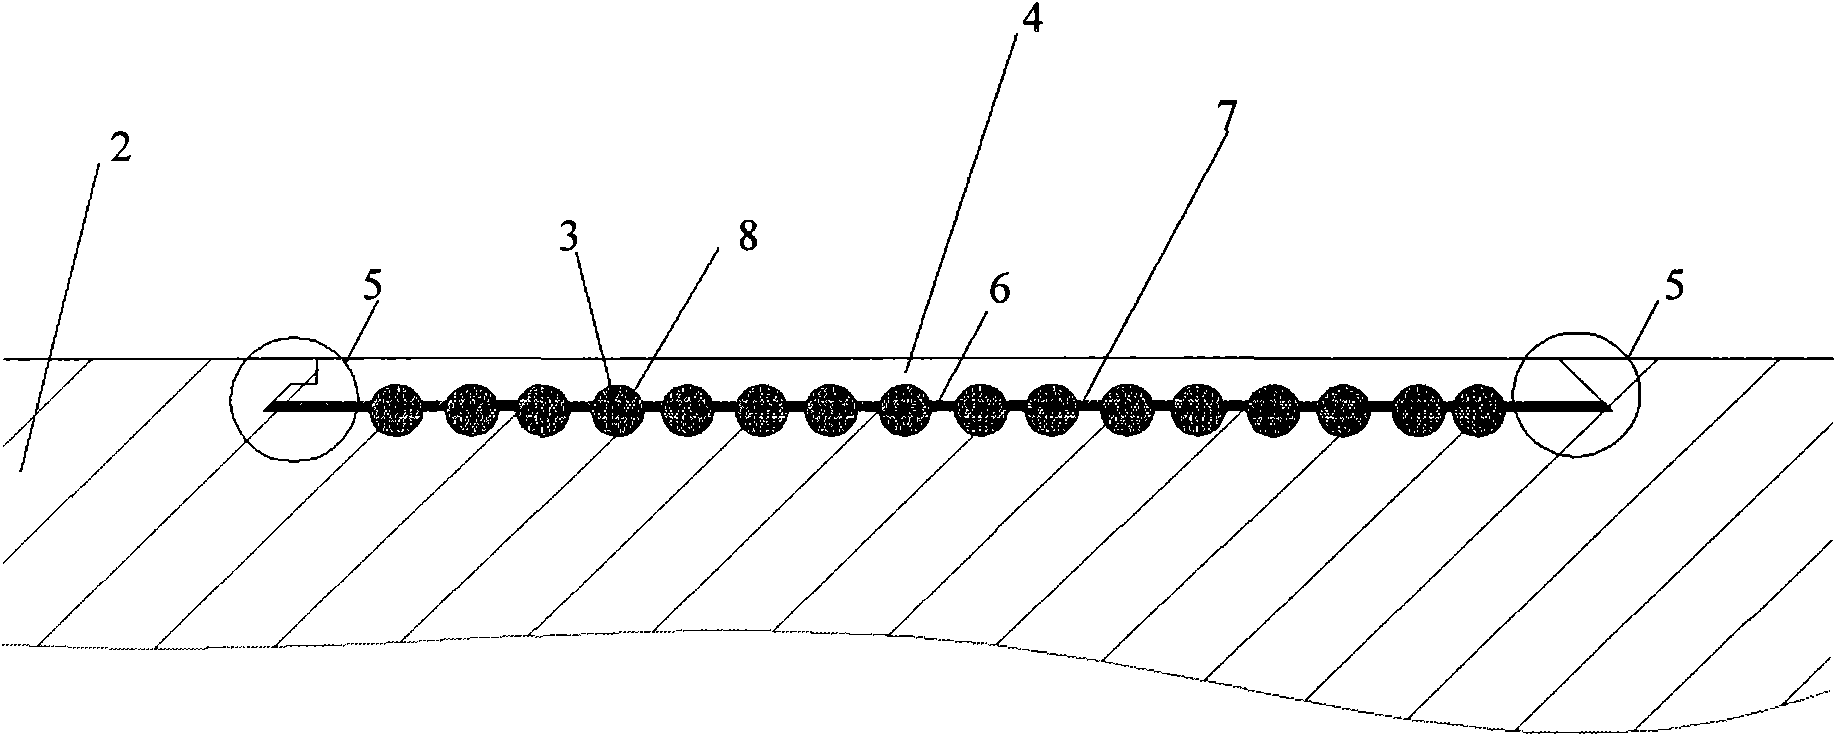 Method for spraying warning mark on surface of airplane heating part or equipment component